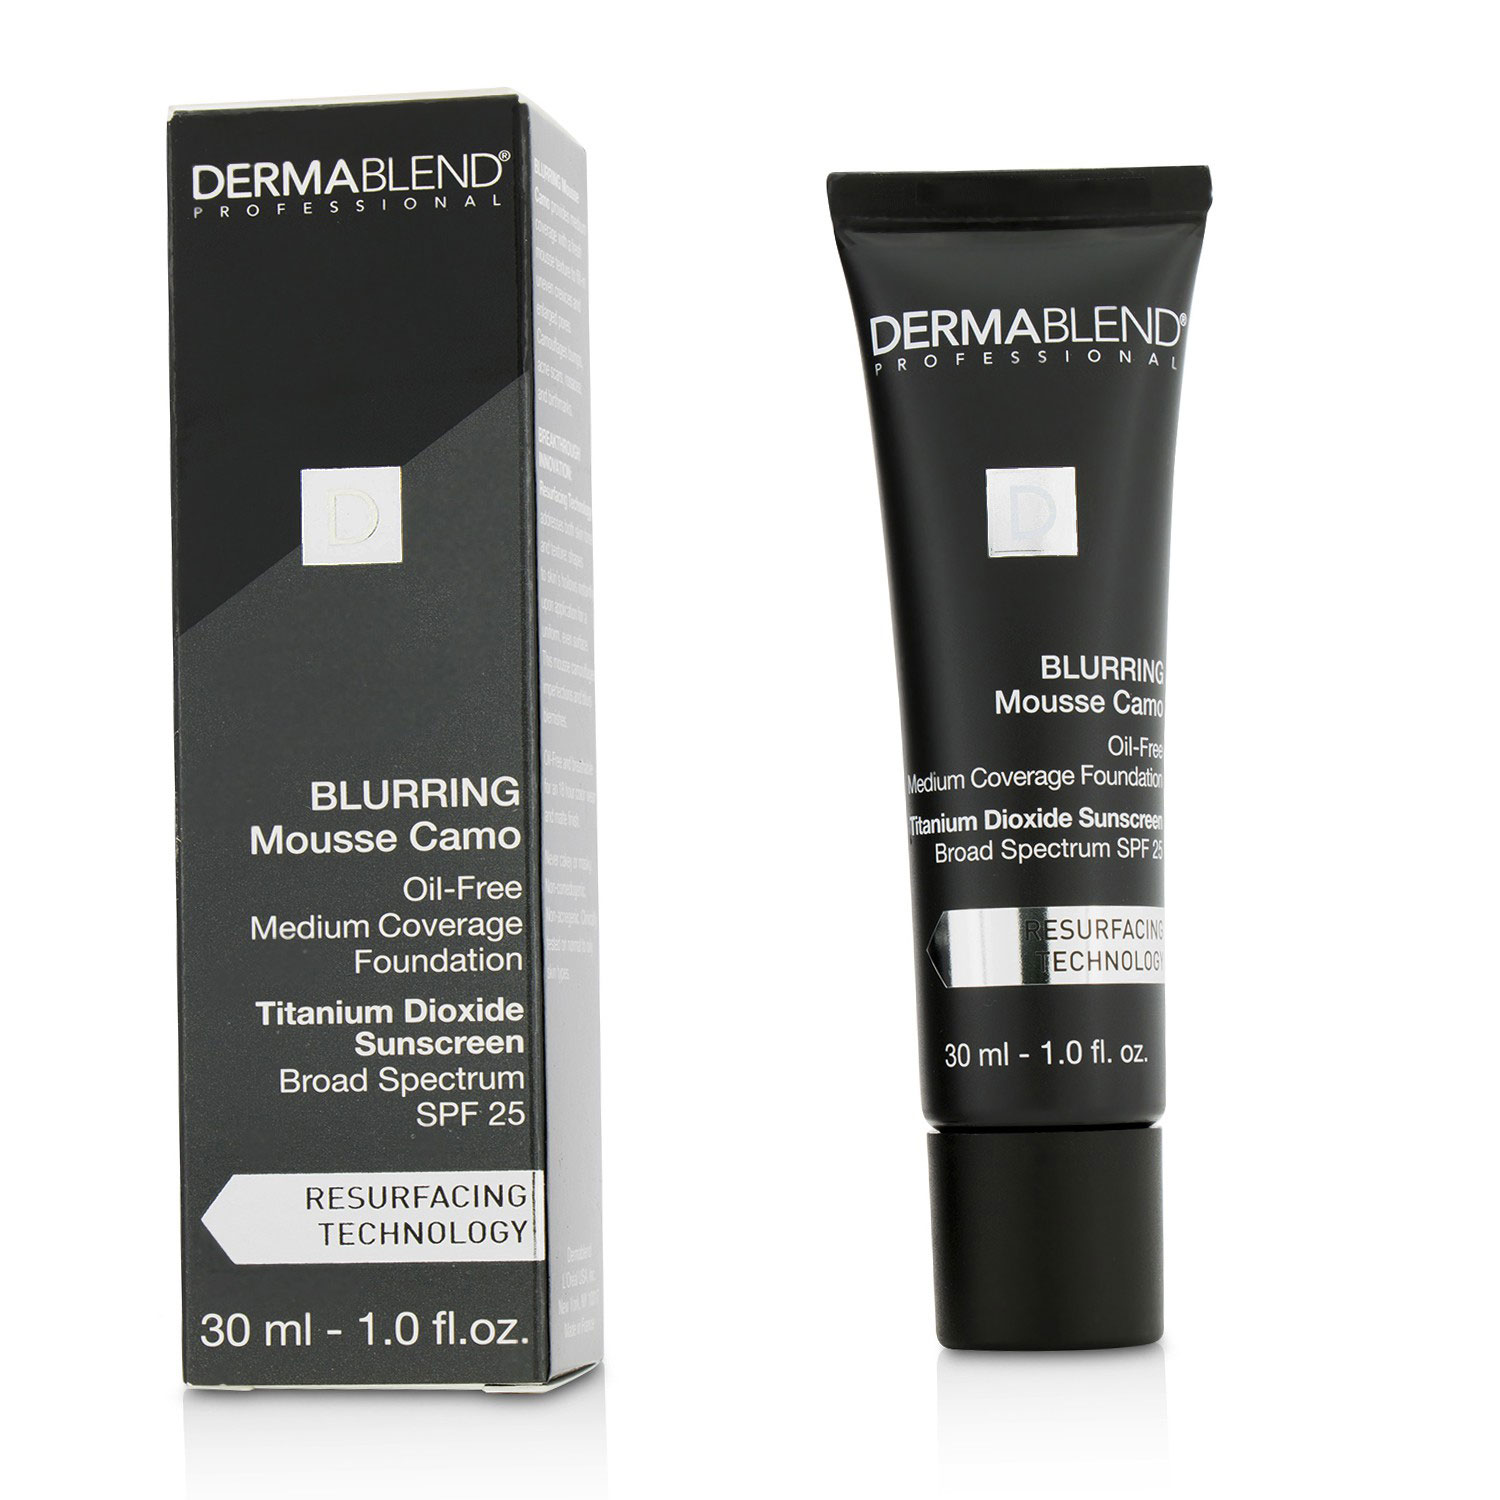 Blurring Mousee Camo Oil Free Foundation SPF 25 (Medium Coverage) - #20N Fwan Dermablend Image